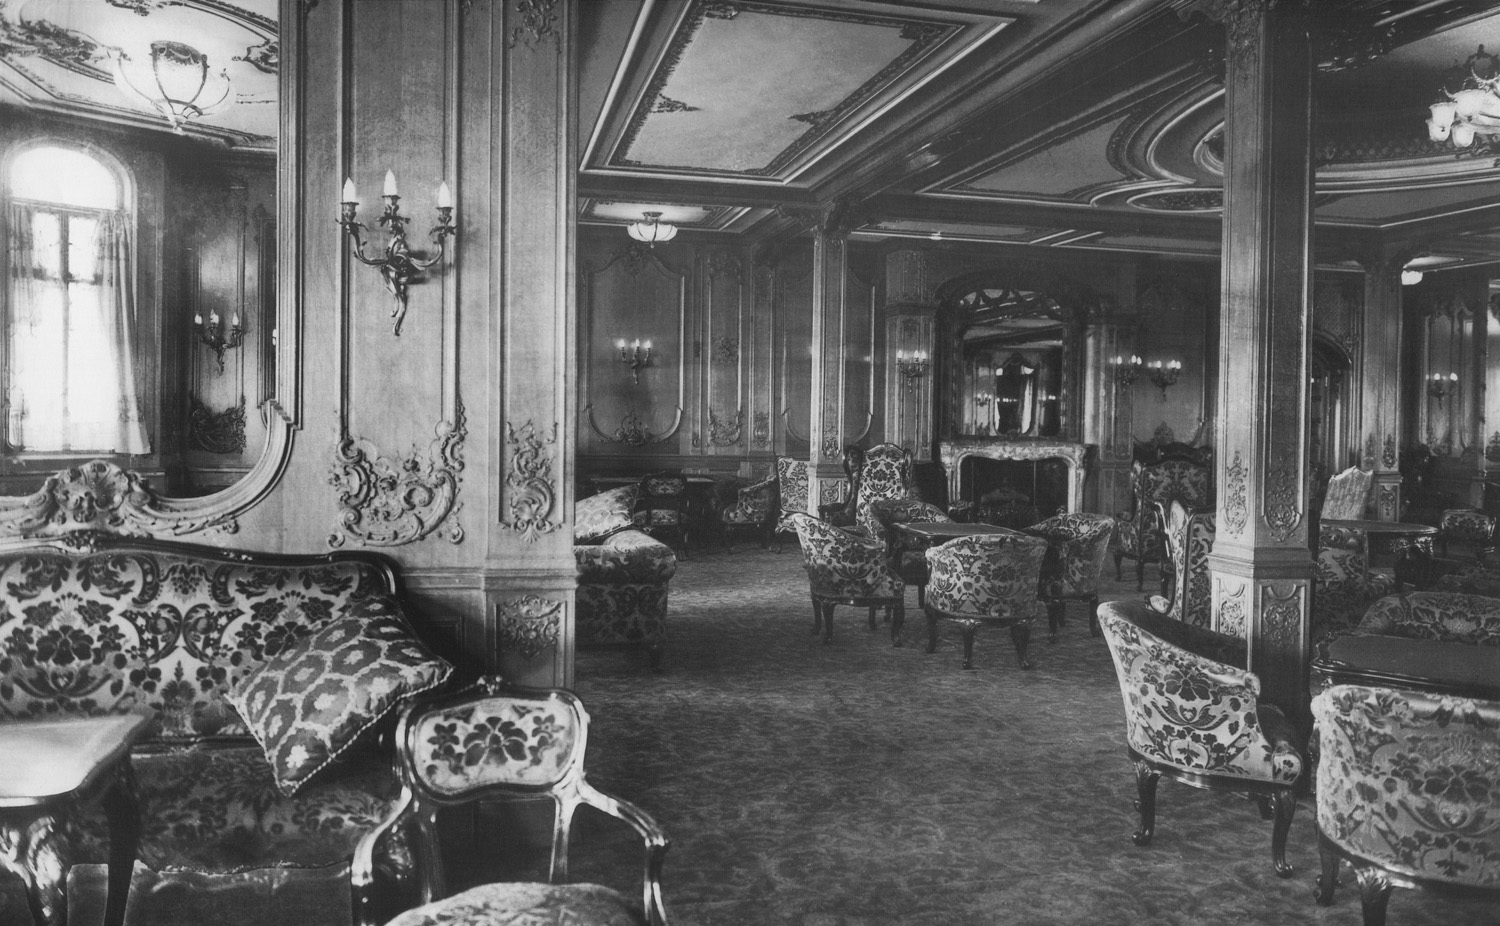 The First Class Lounge on the RMS Titanic, photographed on January 4, 1912.